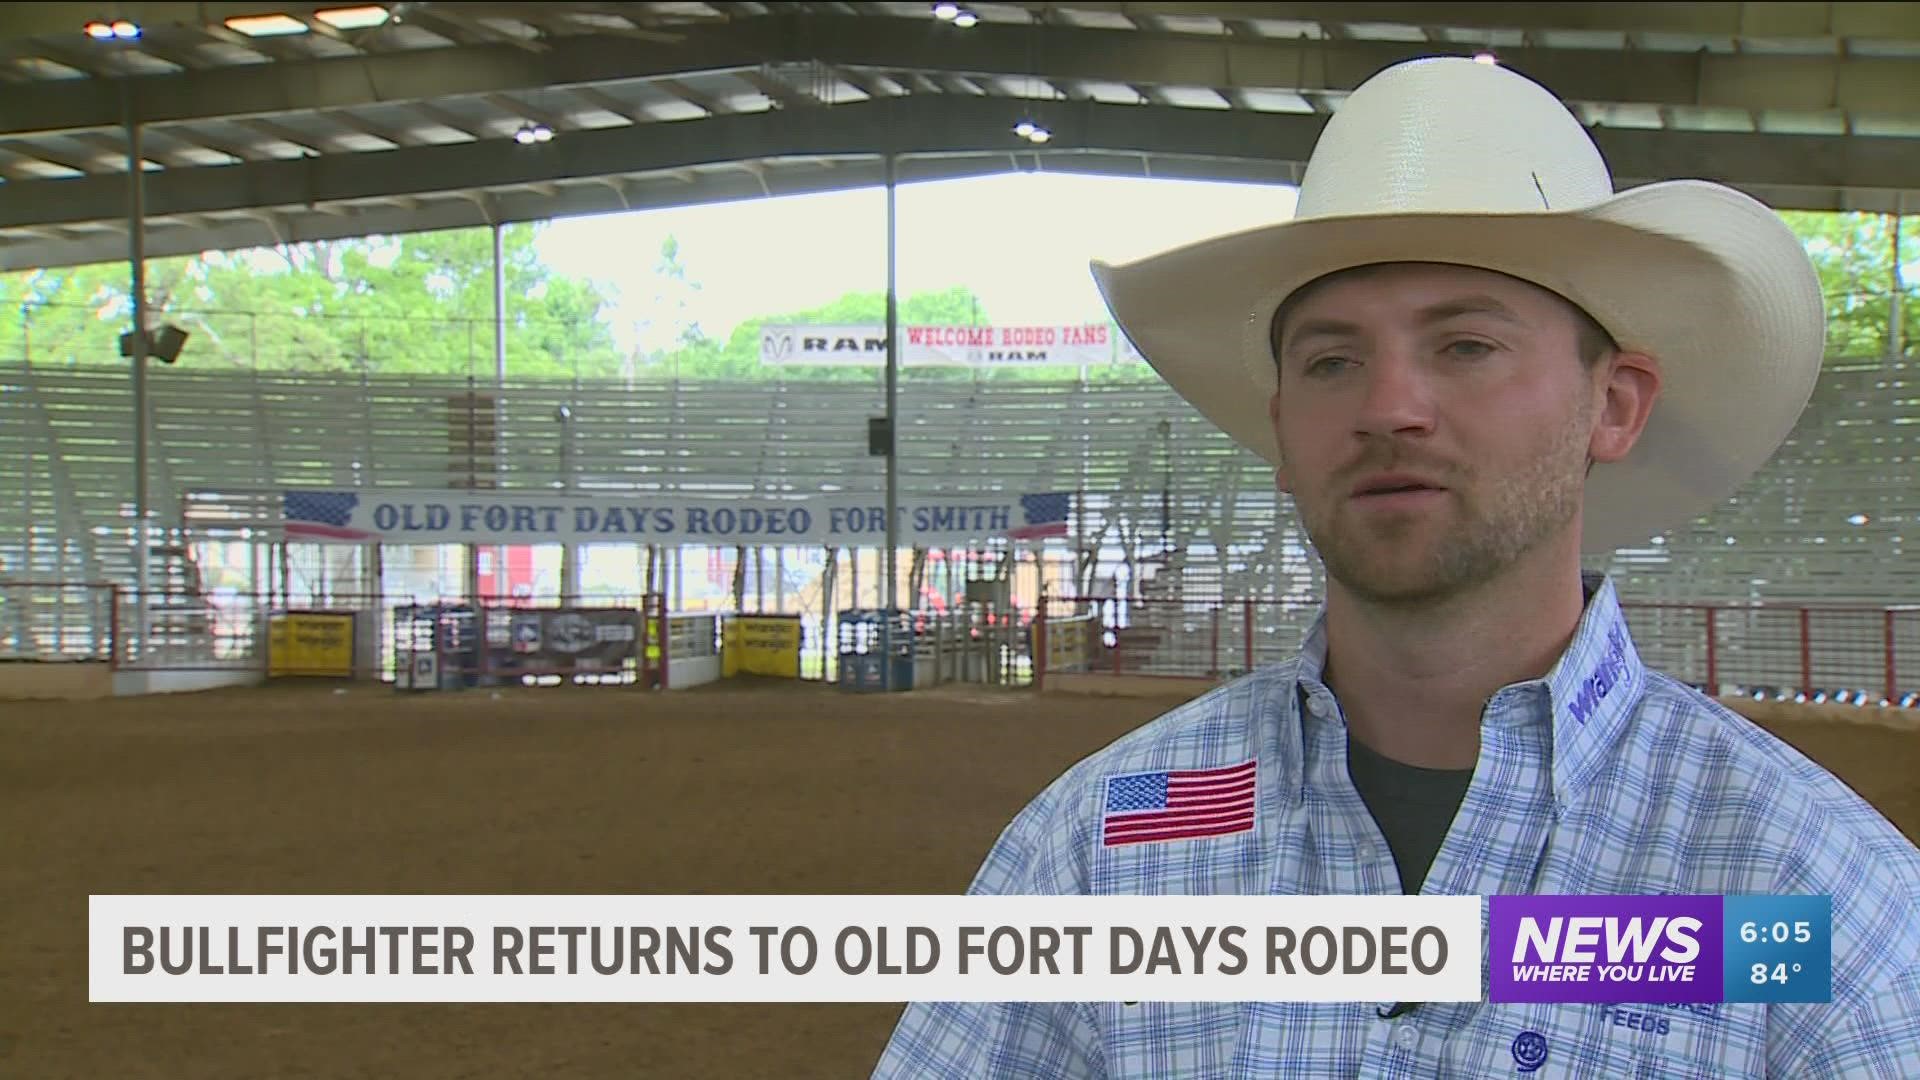 Cody Emerson, a professional bull rider, debuted his return at the Old Fort Days Rodeo after suffering a fracture to his foot in January.